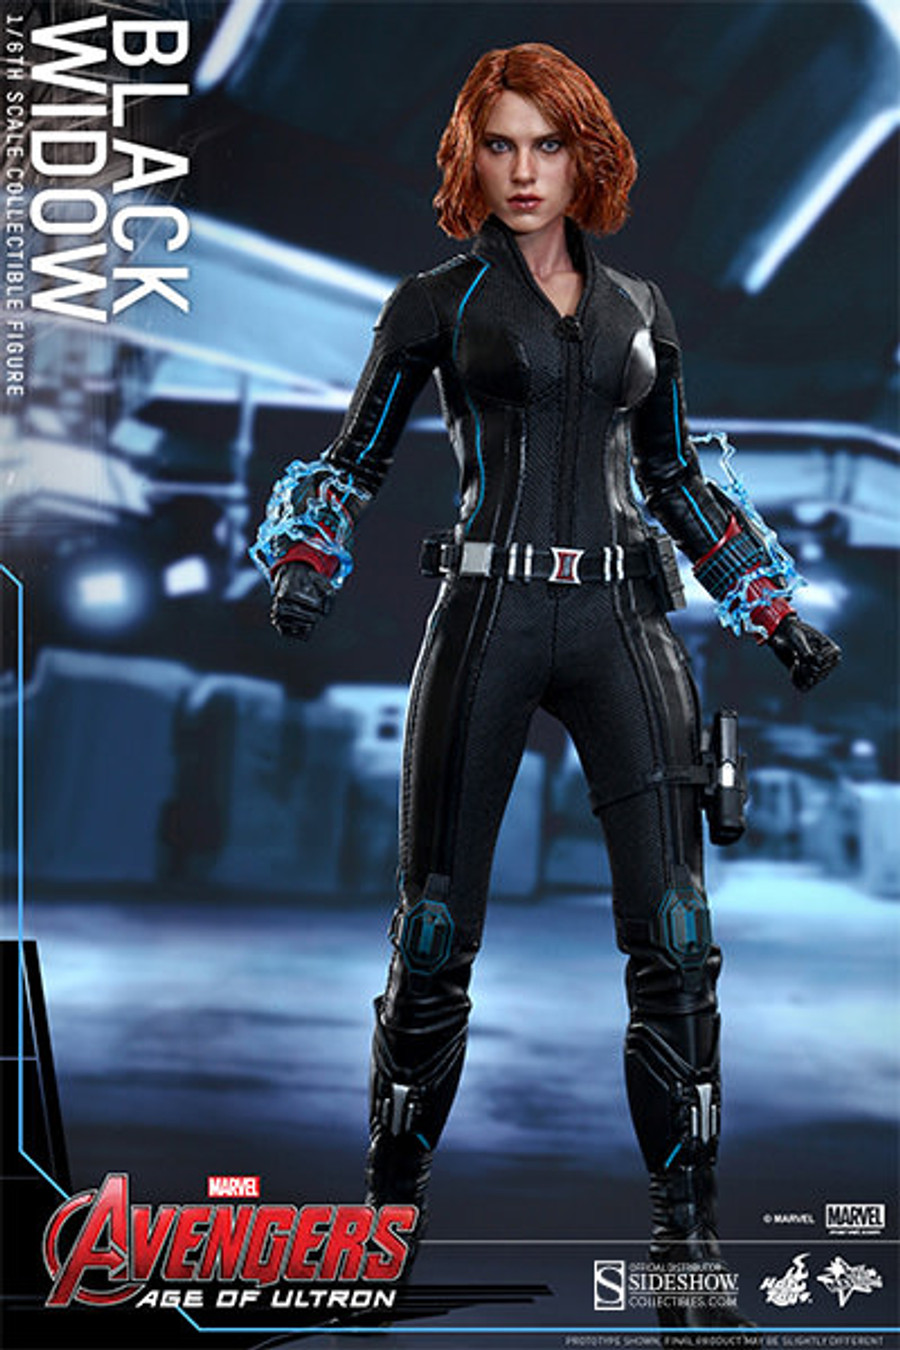 Hot Toys - Black Widow - Avengers: Age of Ultron